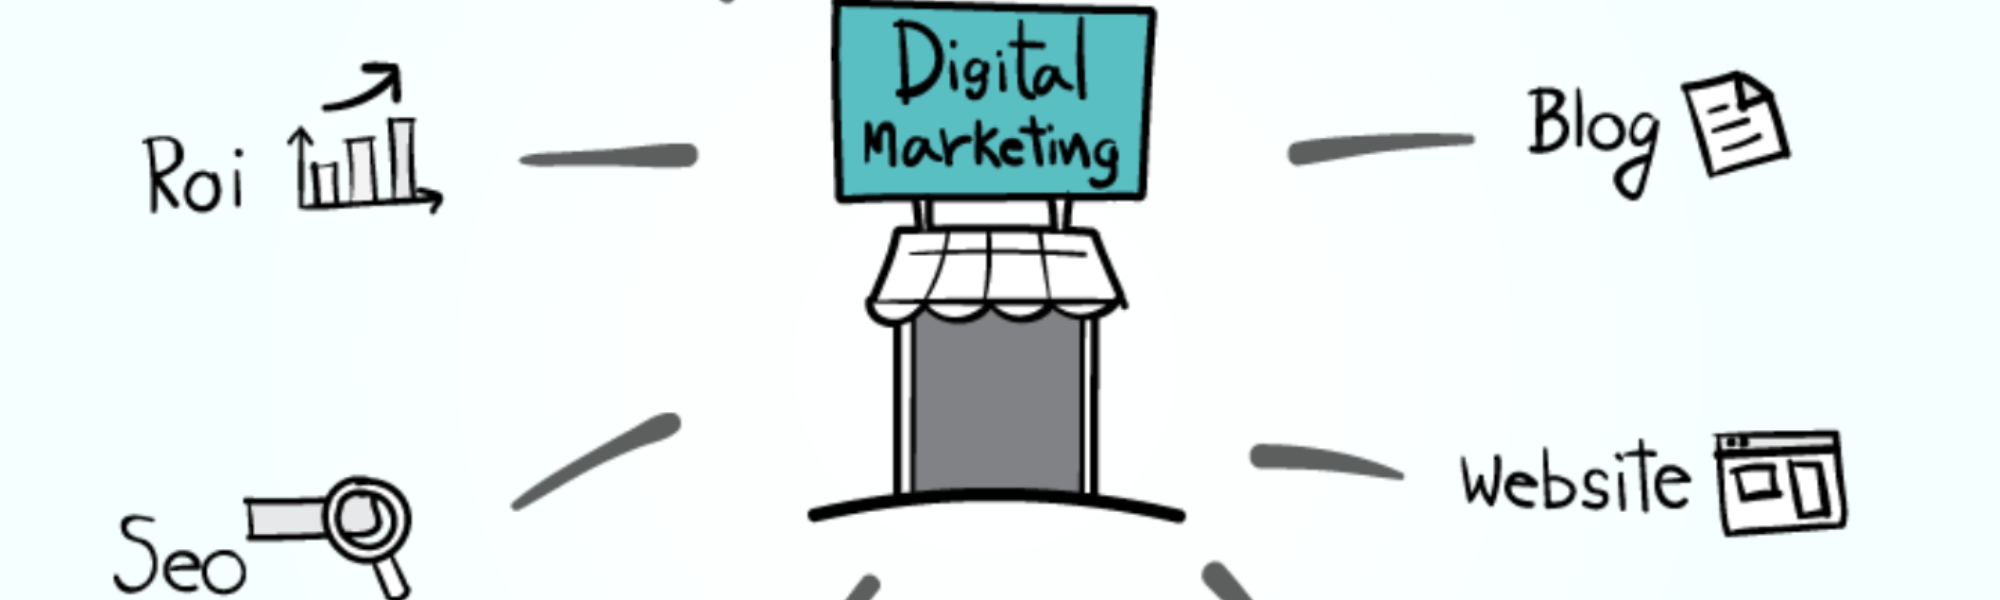 To understand the totality of a digital marketing channel mix, one must first deepen their understanding of some key terms. Here is a list of all marketing channels and key terms we will explore in our blog. Digital marketing, social media, marketing mix, social media marketing, marketing strategy, digital marketing agency, online marketing, performance marketing, internet marketing, social media marketing agency, social media agency, display advertising, media marketing, search engines marketing affiliate marketing. Copy